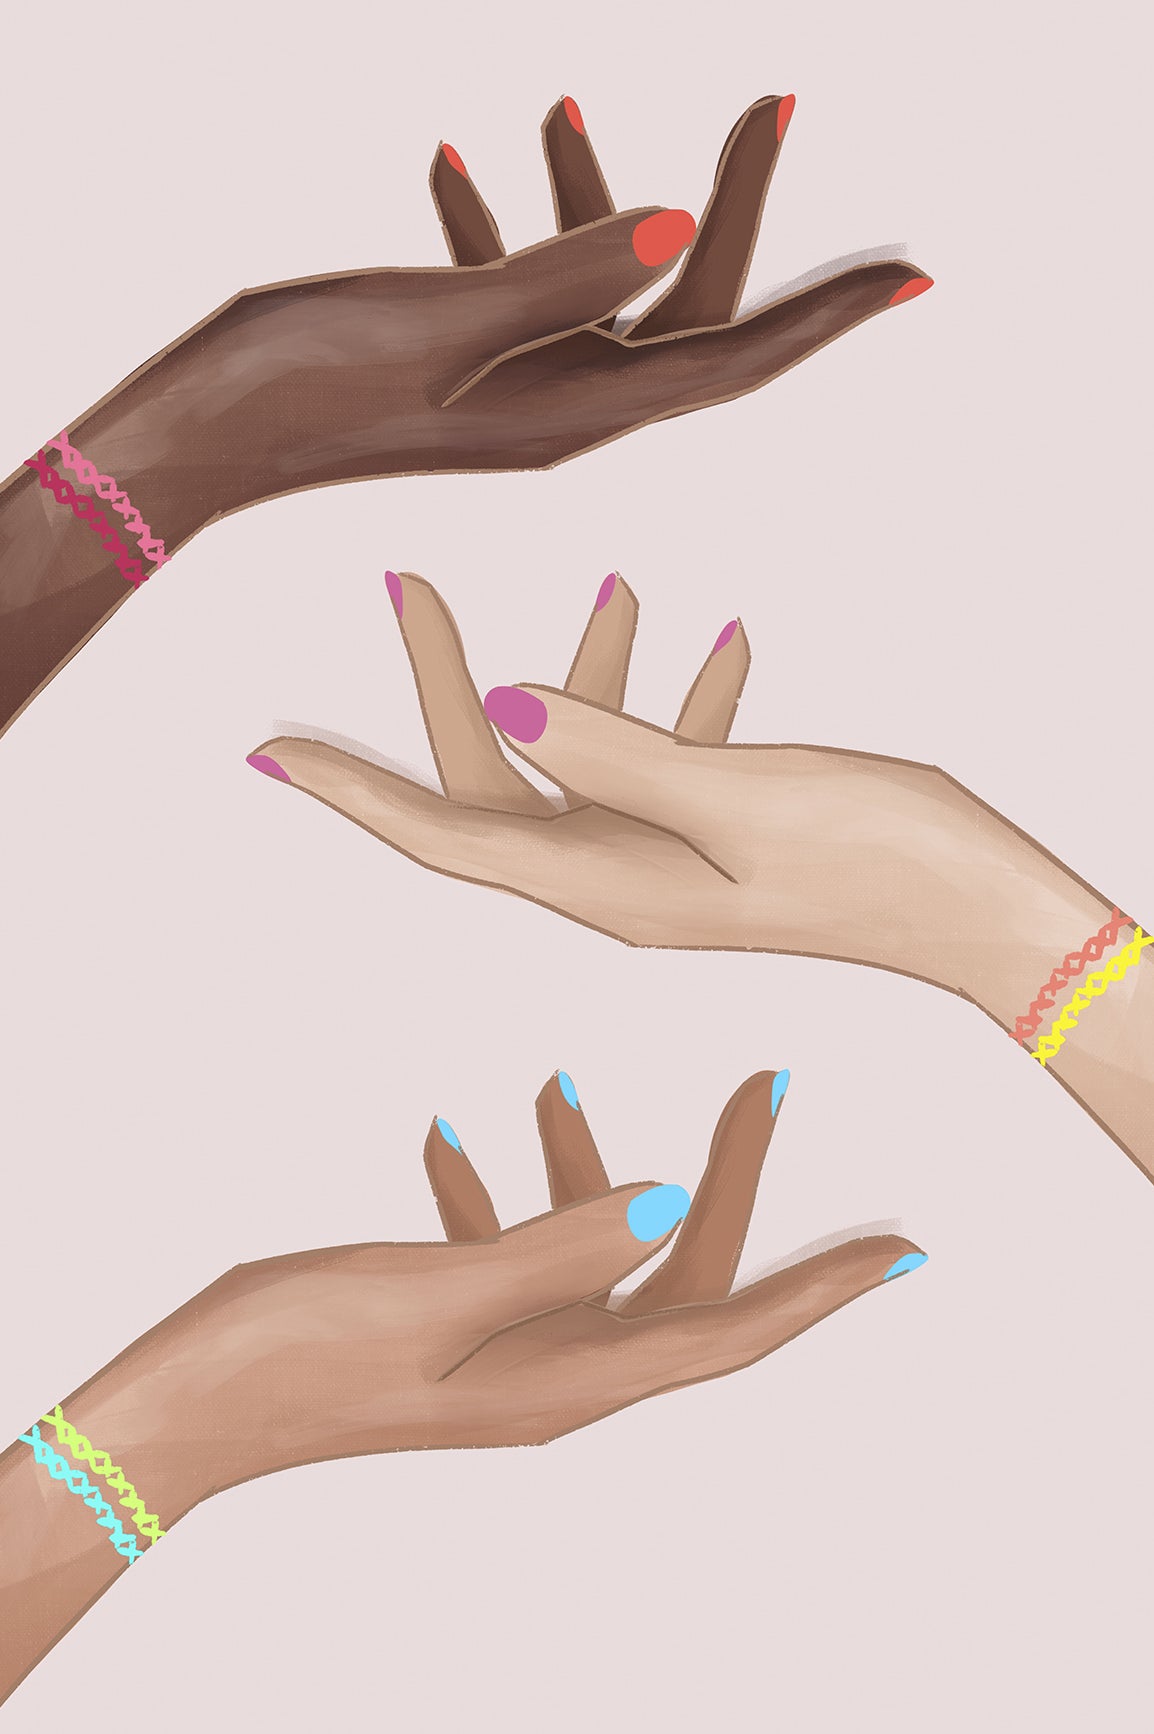 3 hands in all different skin tones